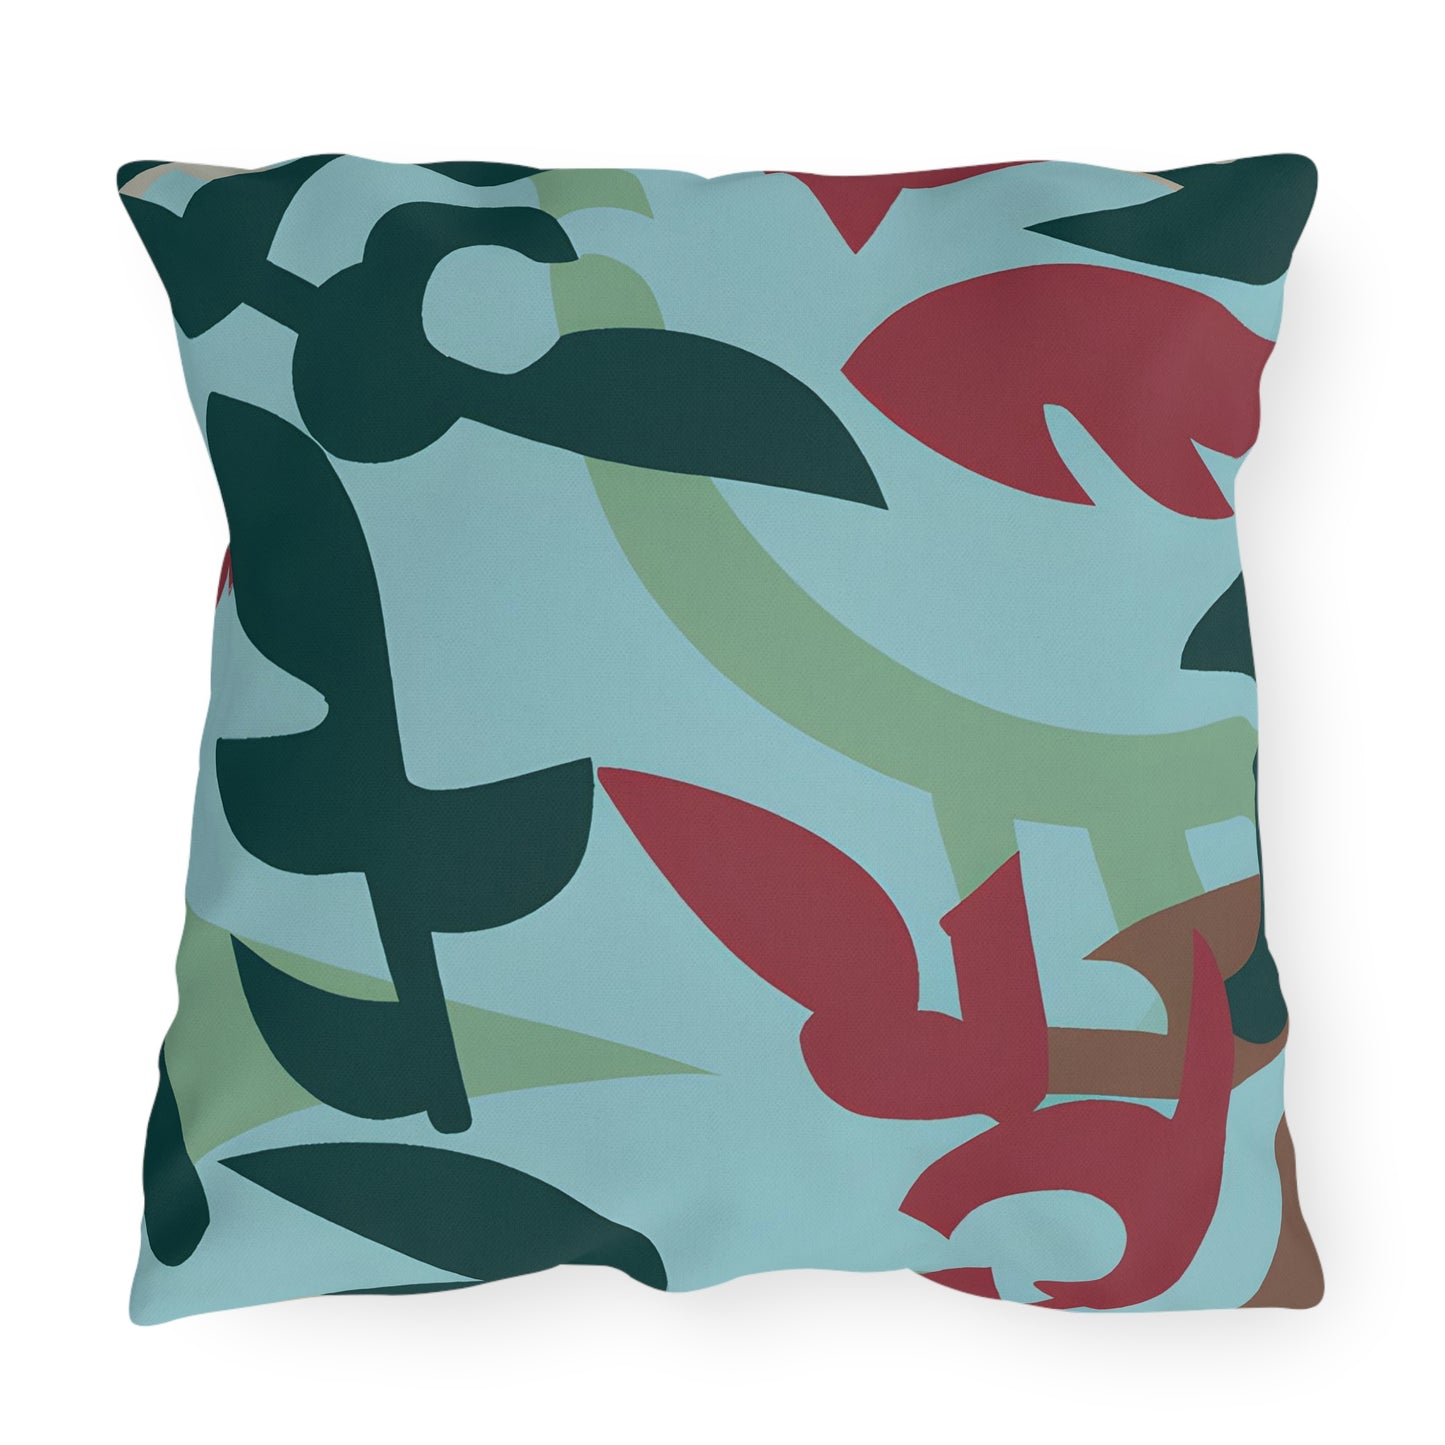 Chaparral Ione - Outdoor Art Pillow